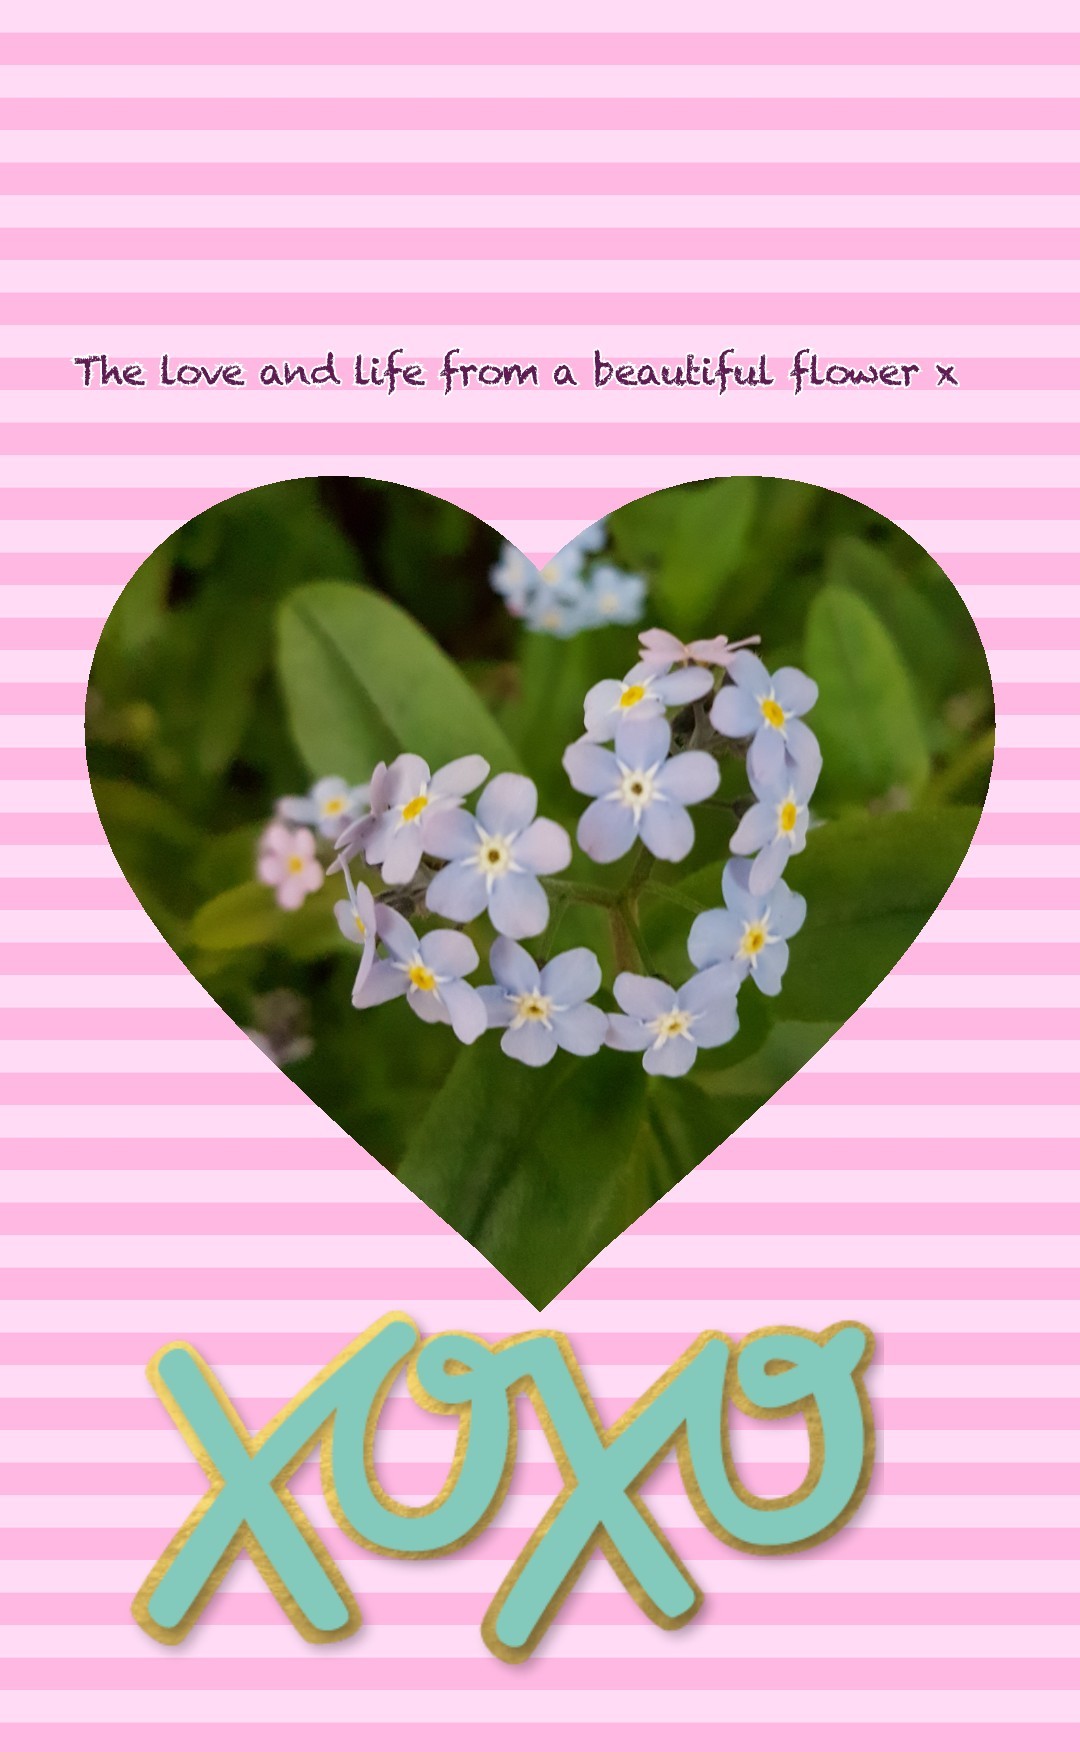 The love and life from a beautiful flower x